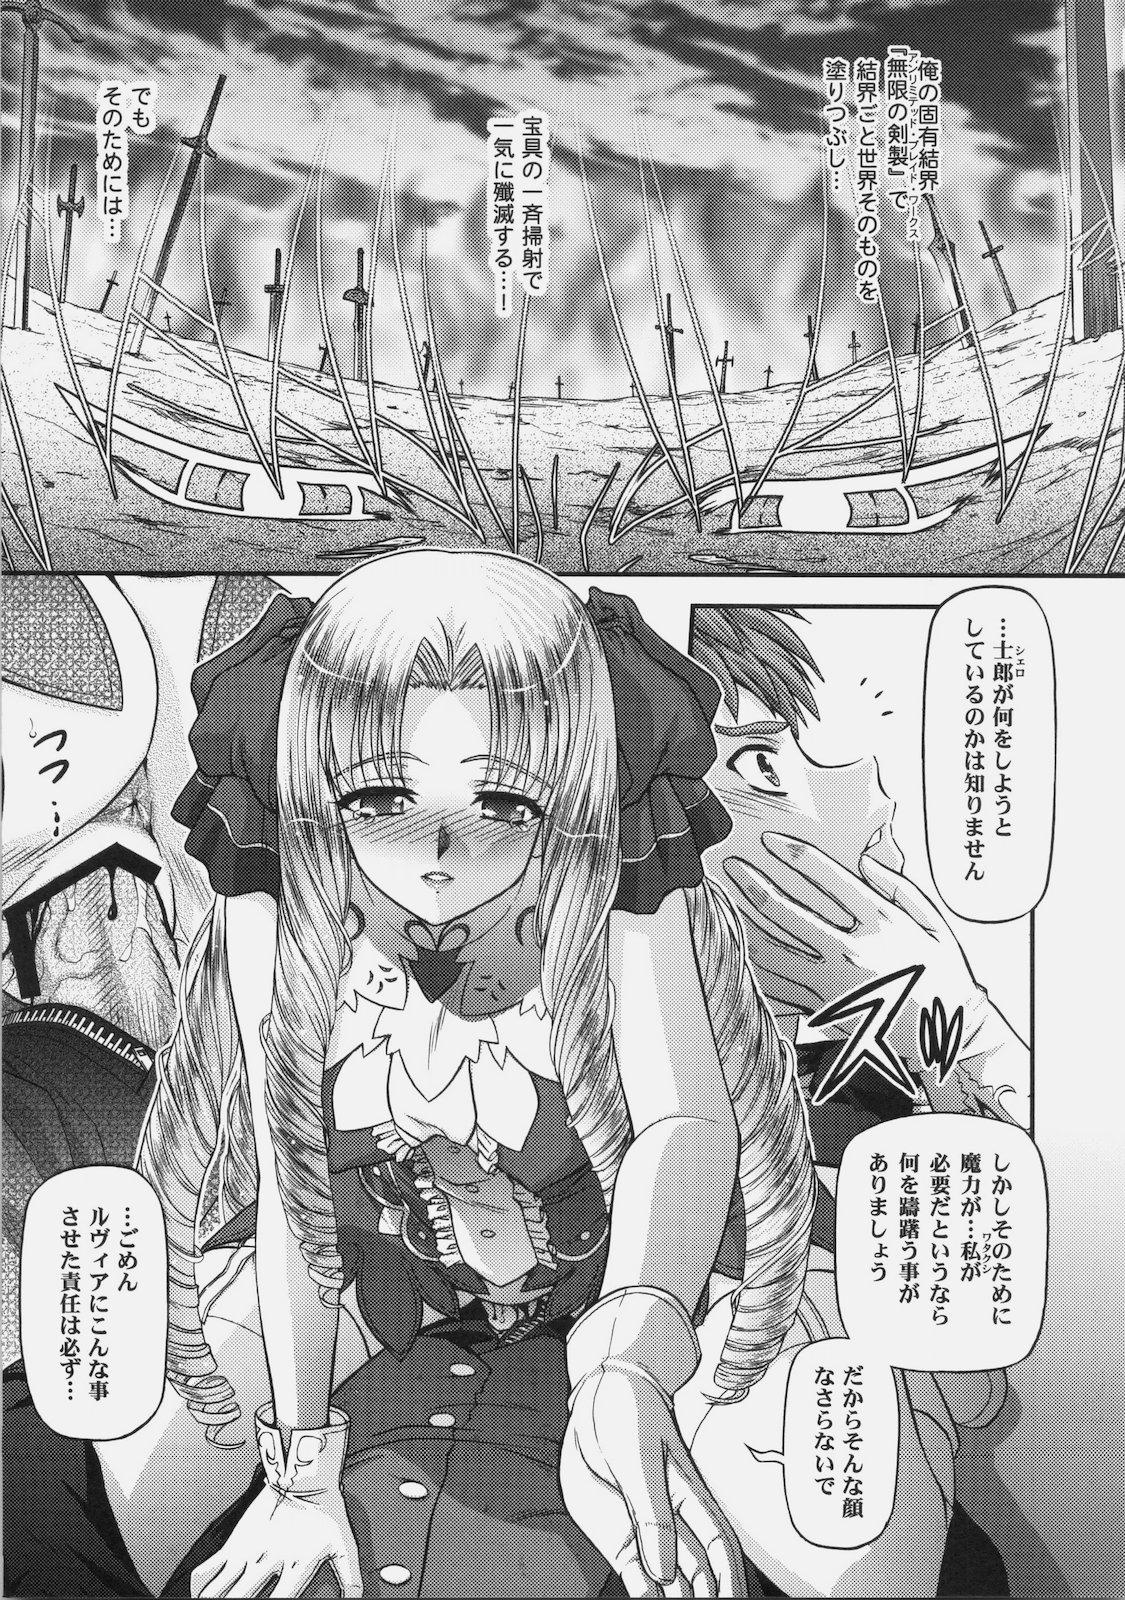 Shaking BLUE BLOOD'S vol.26 - Fate hollow ataraxia Girlfriend - Page 9